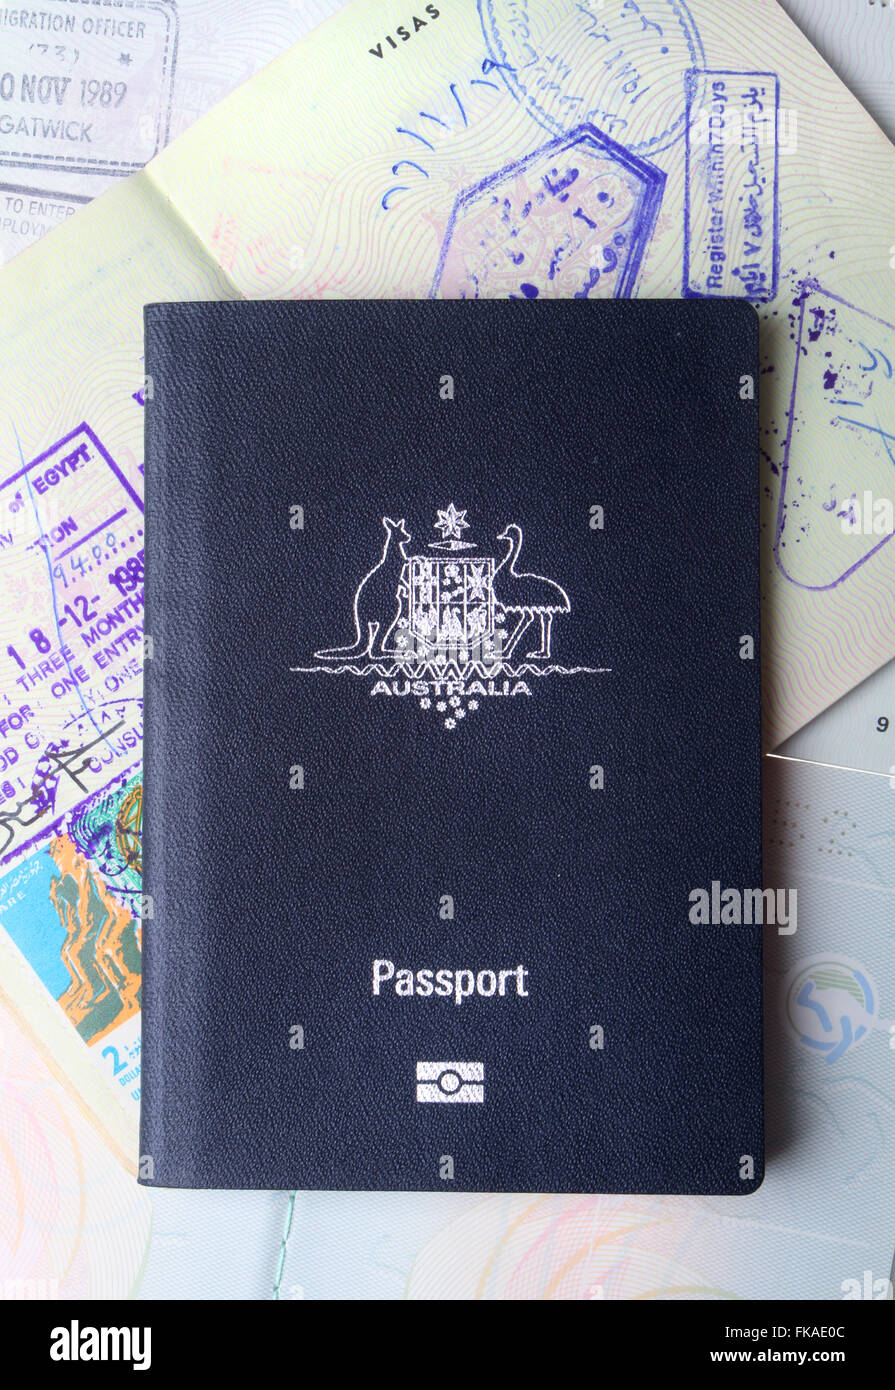 Australian passport sitting on open passports pages and visa stamps Stock Photo -